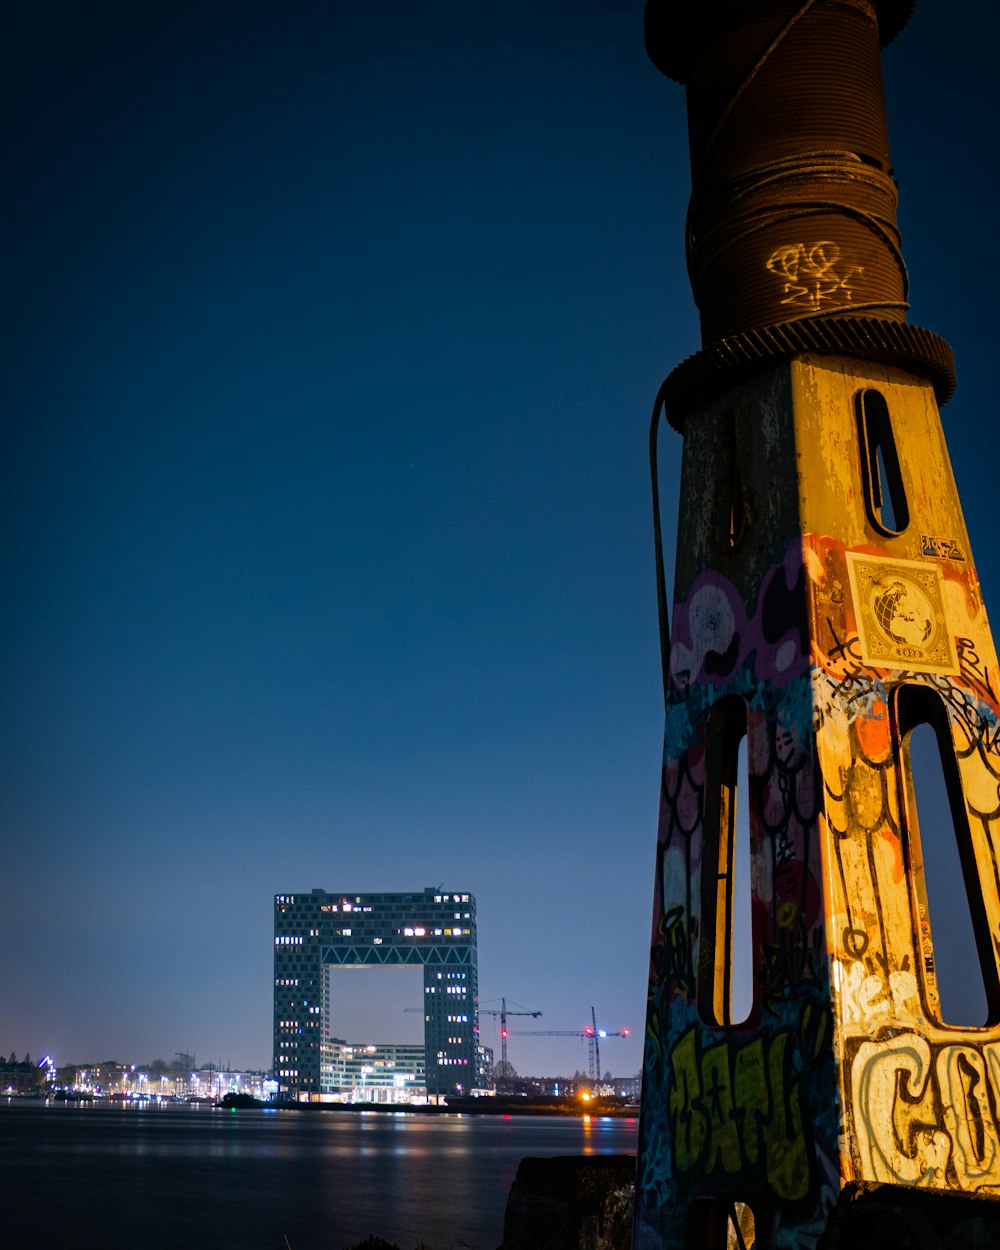 a tall tower with graffiti on it next to a body of water